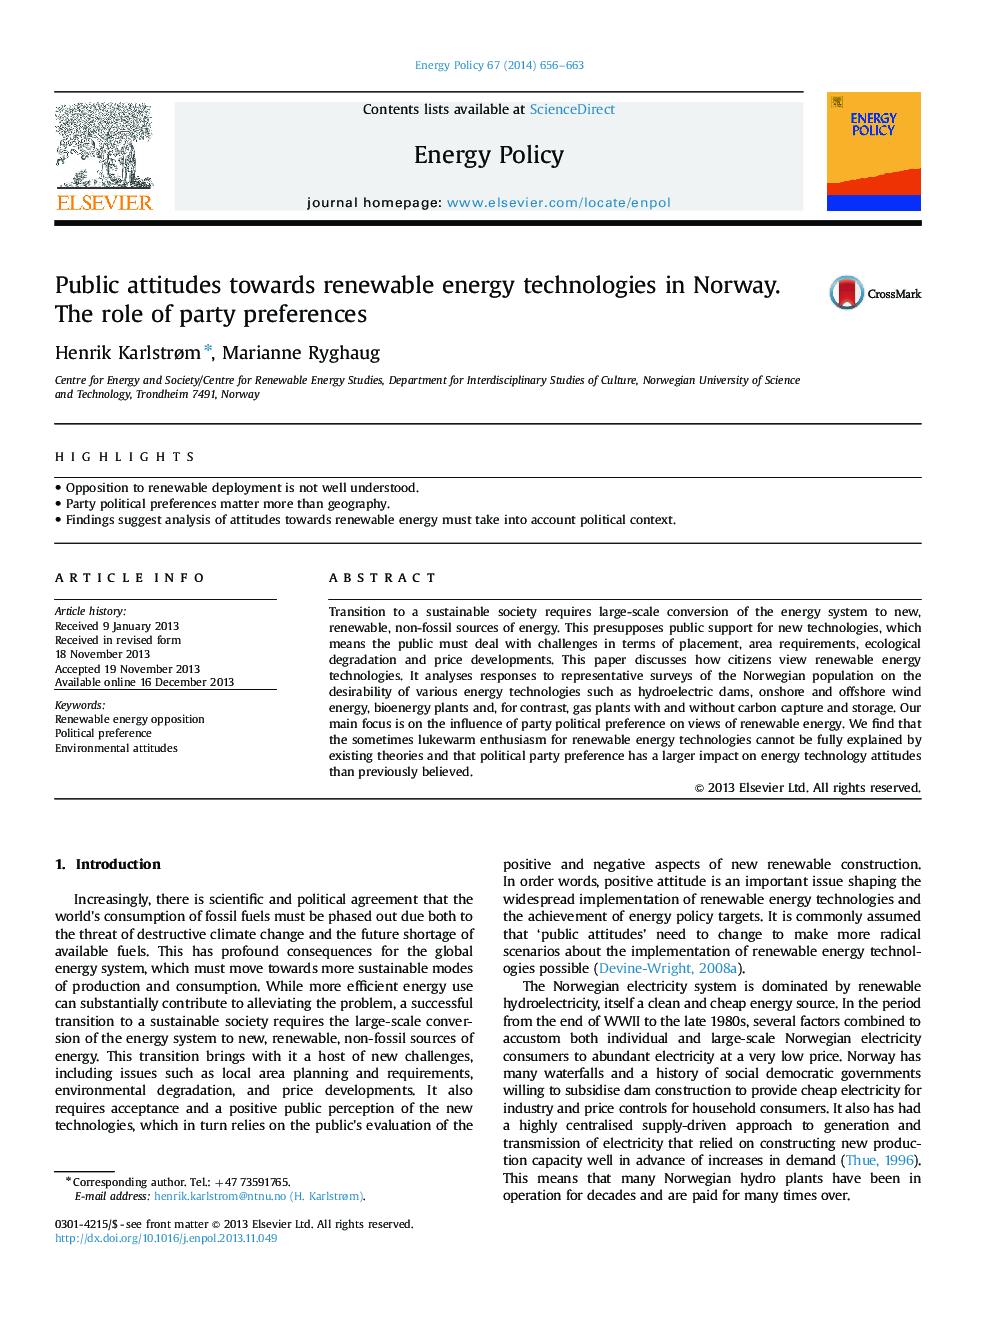 Public attitudes towards renewable energy technologies in Norway. The role of party preferences